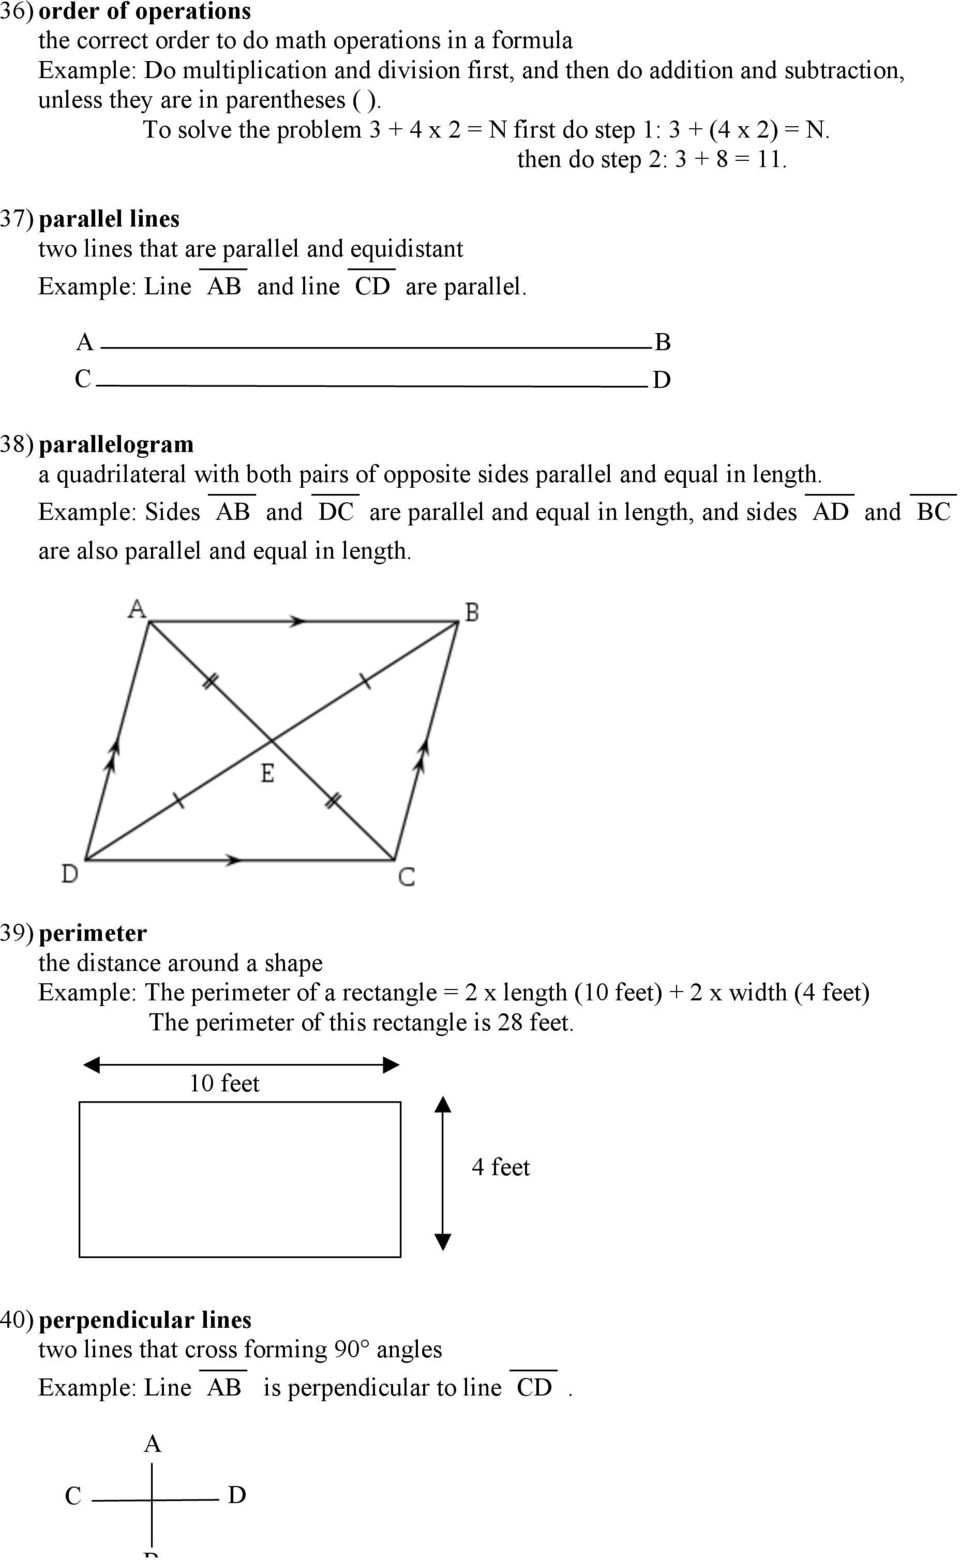 38) parallelogram a quadrilateral with both pairs of opposite sides parallel and equal in length.